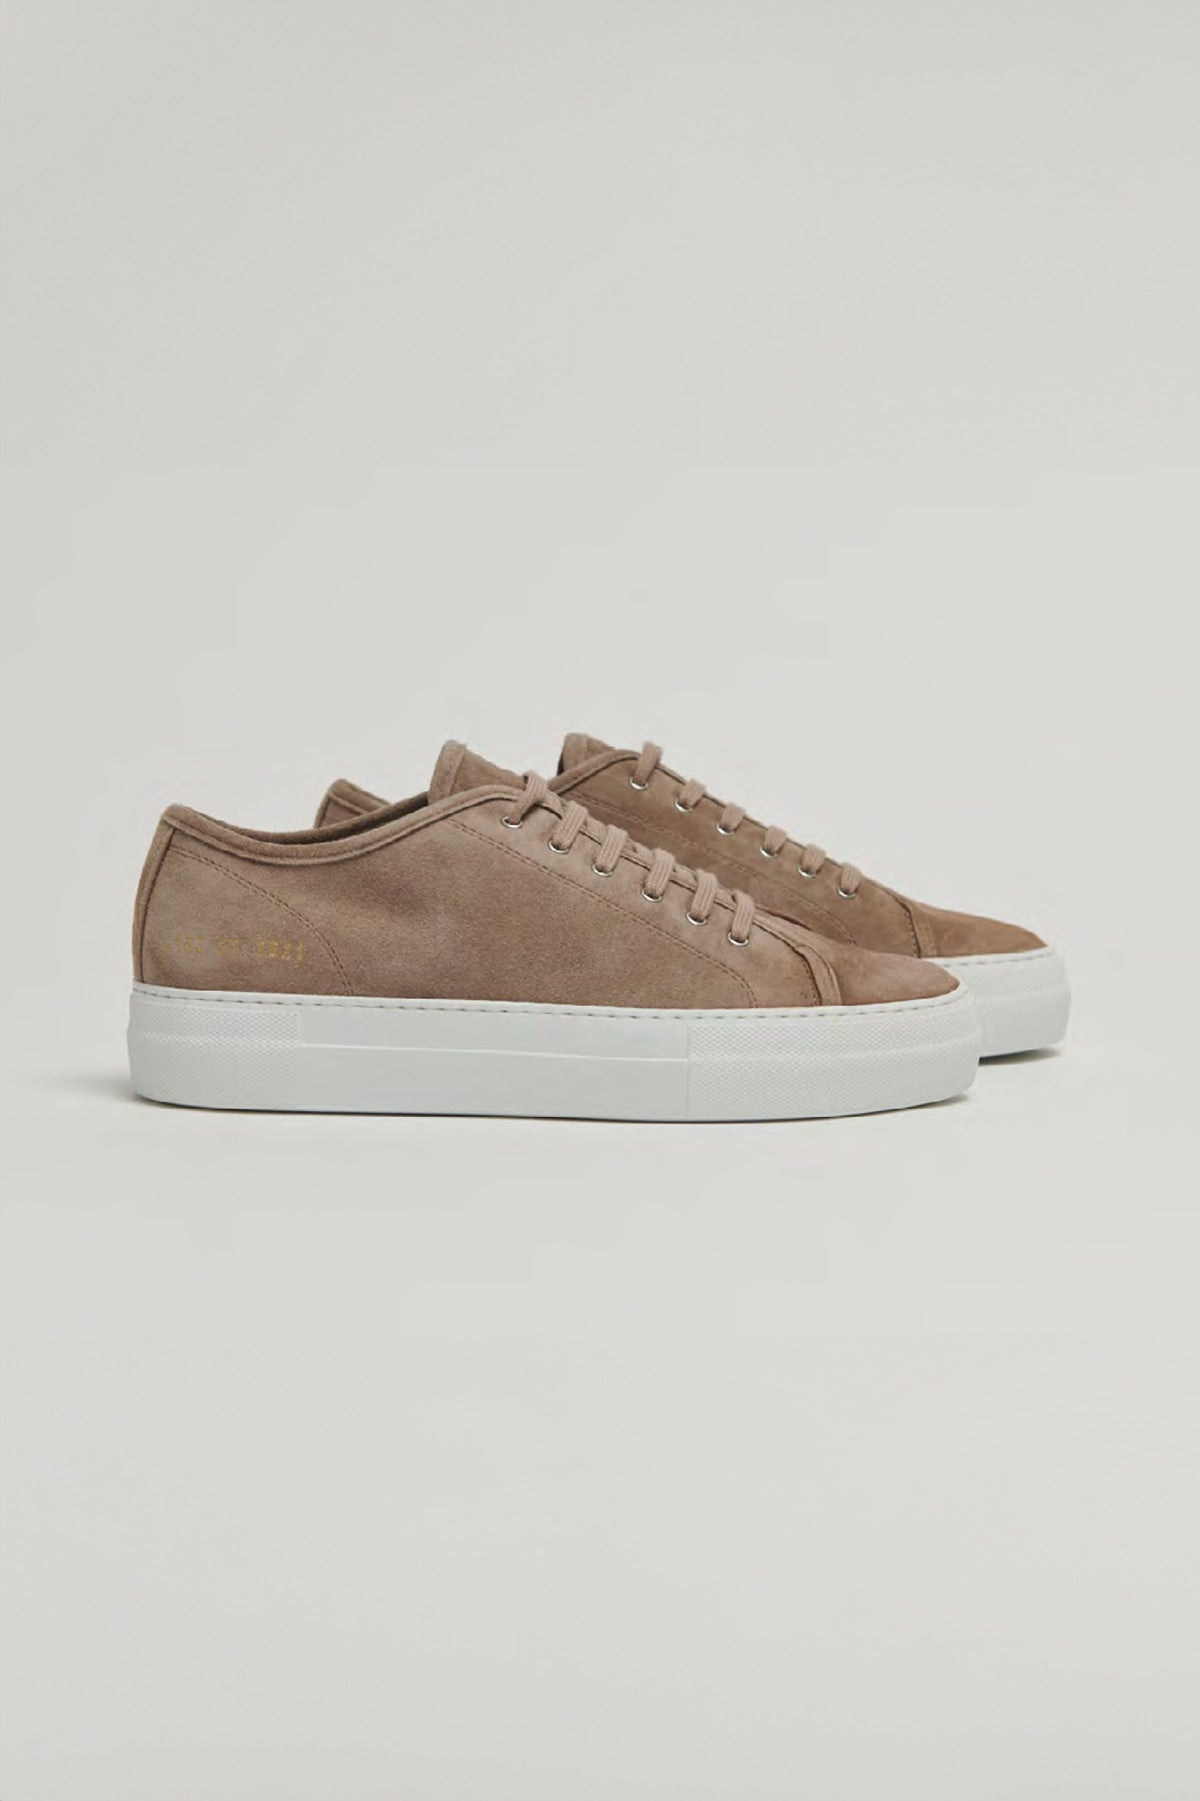 Common Projects — Tournament Low Super with Shearling